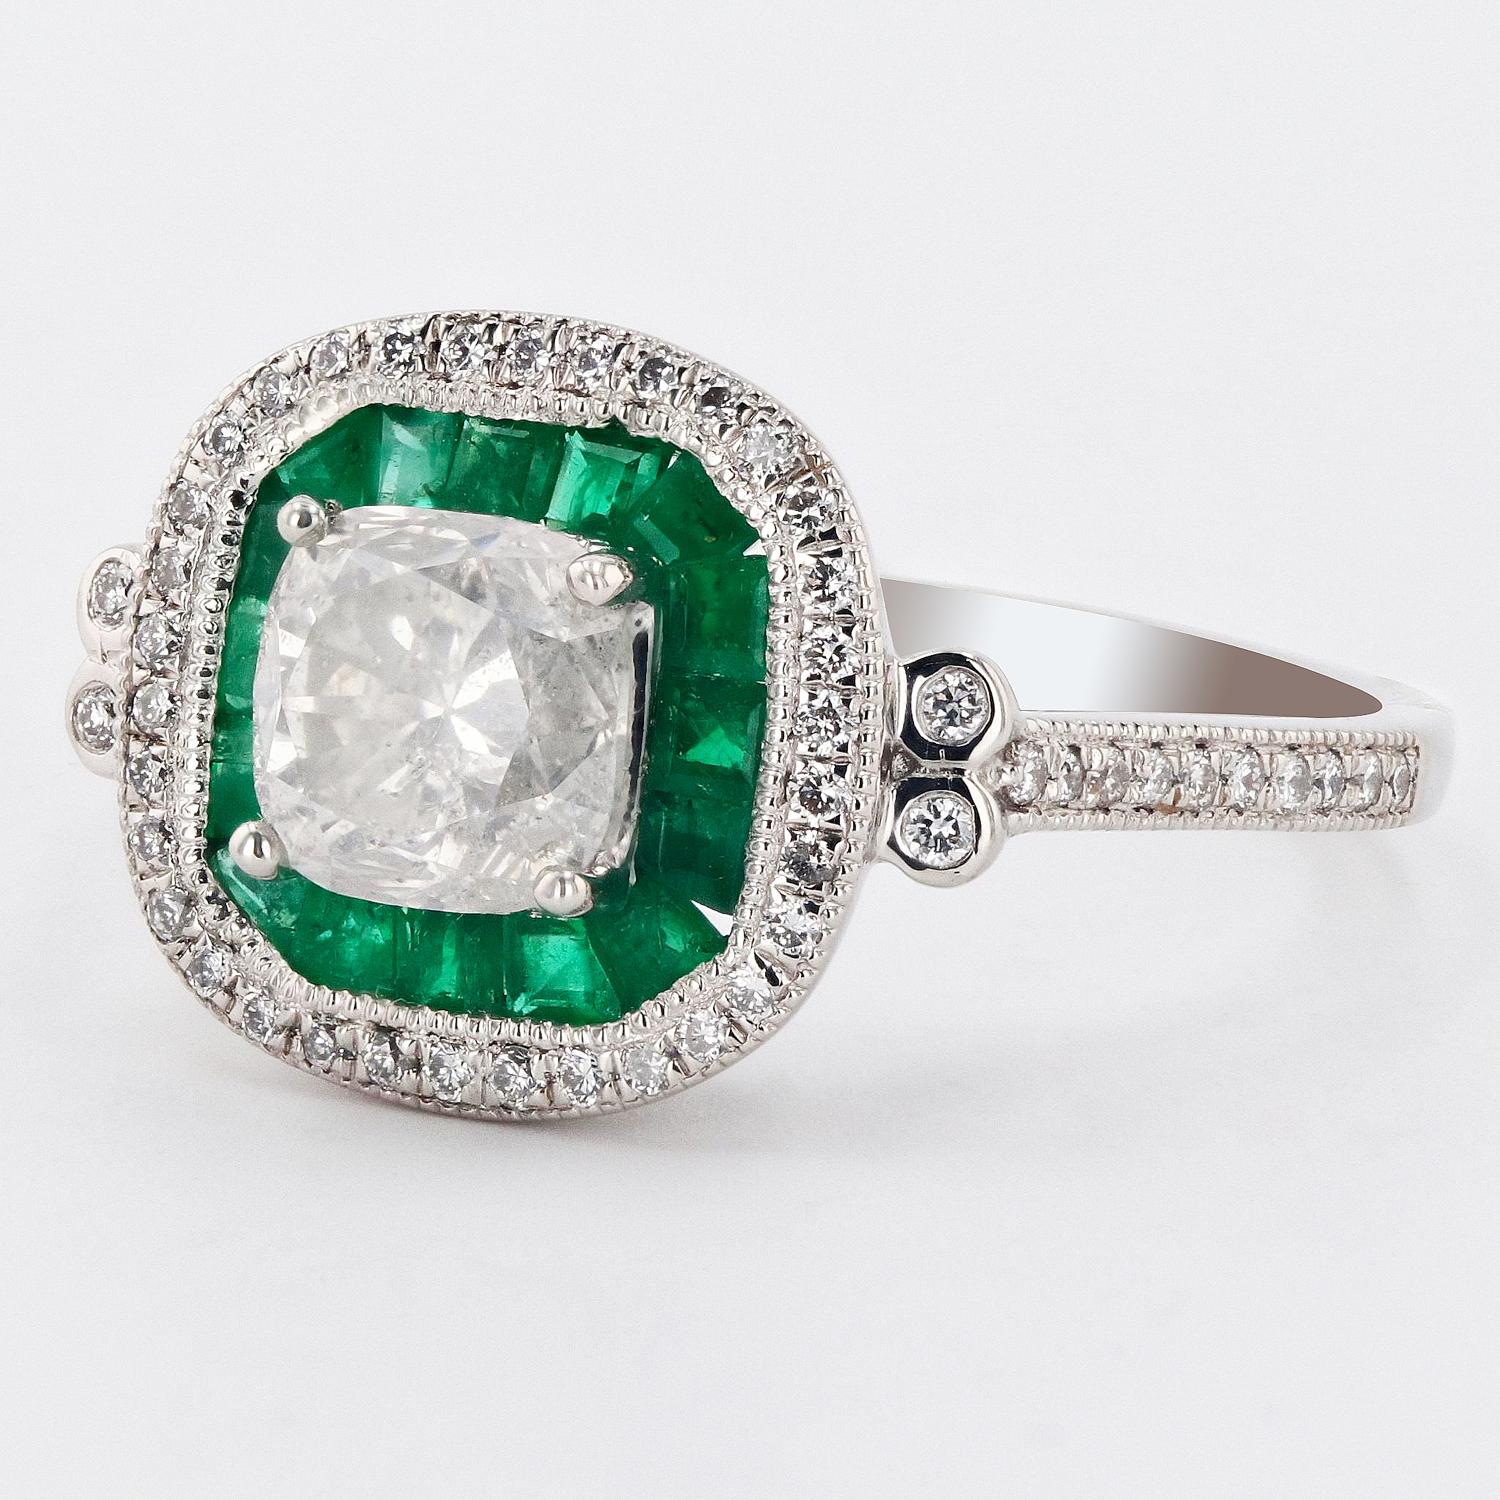 One electronically tested platinum ladies cast & assembled diamond & emerald ring. 

The featured diamond is set within an inner emerald bezel and and outer diamond bezel, supported by a lattice under gallery and diamond set shoulders, completed by